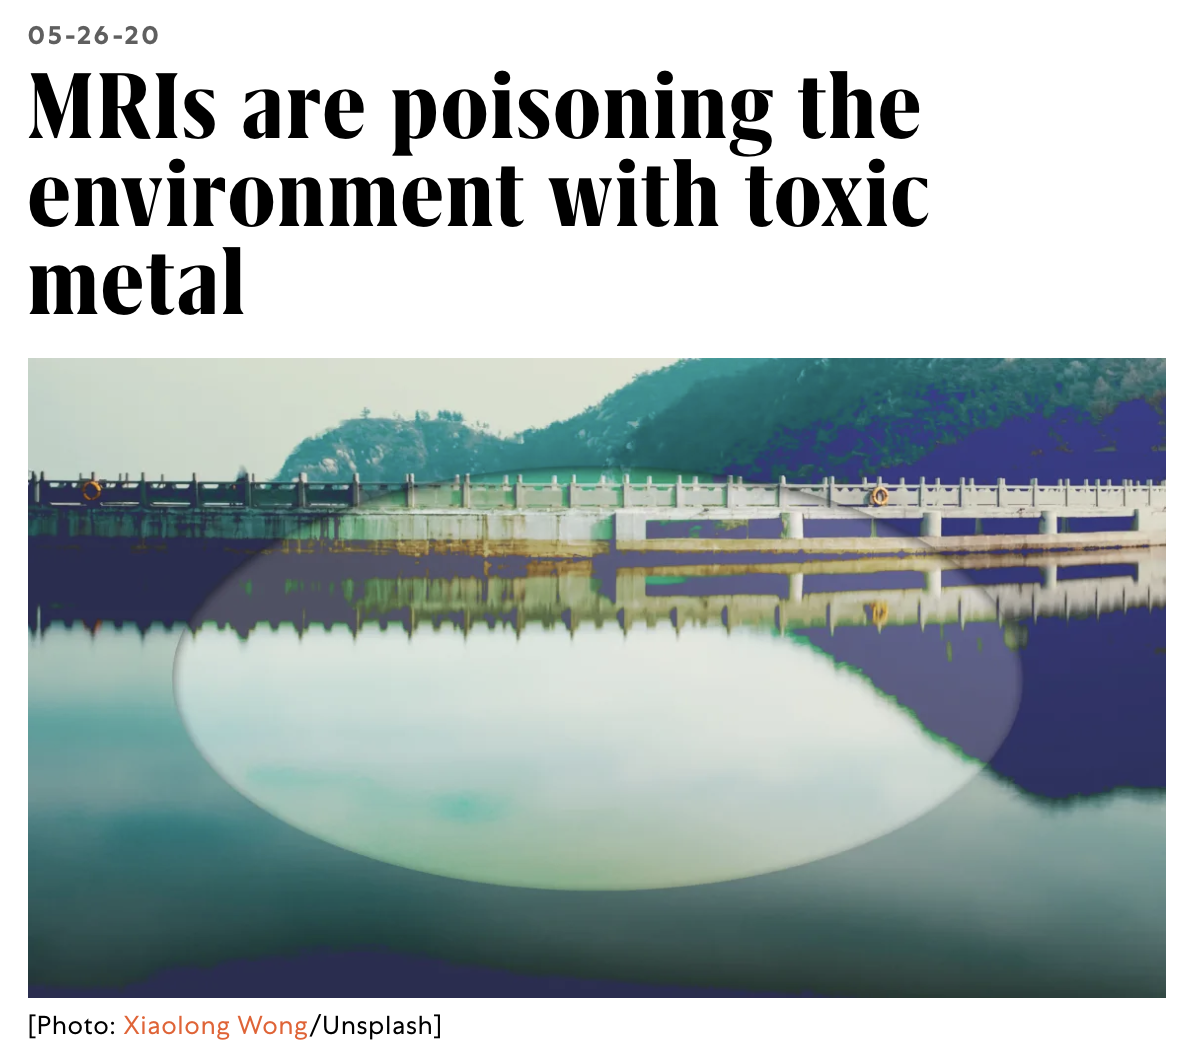 Fast Company: MRIs are poisoning the environment with a toxic heavy metal